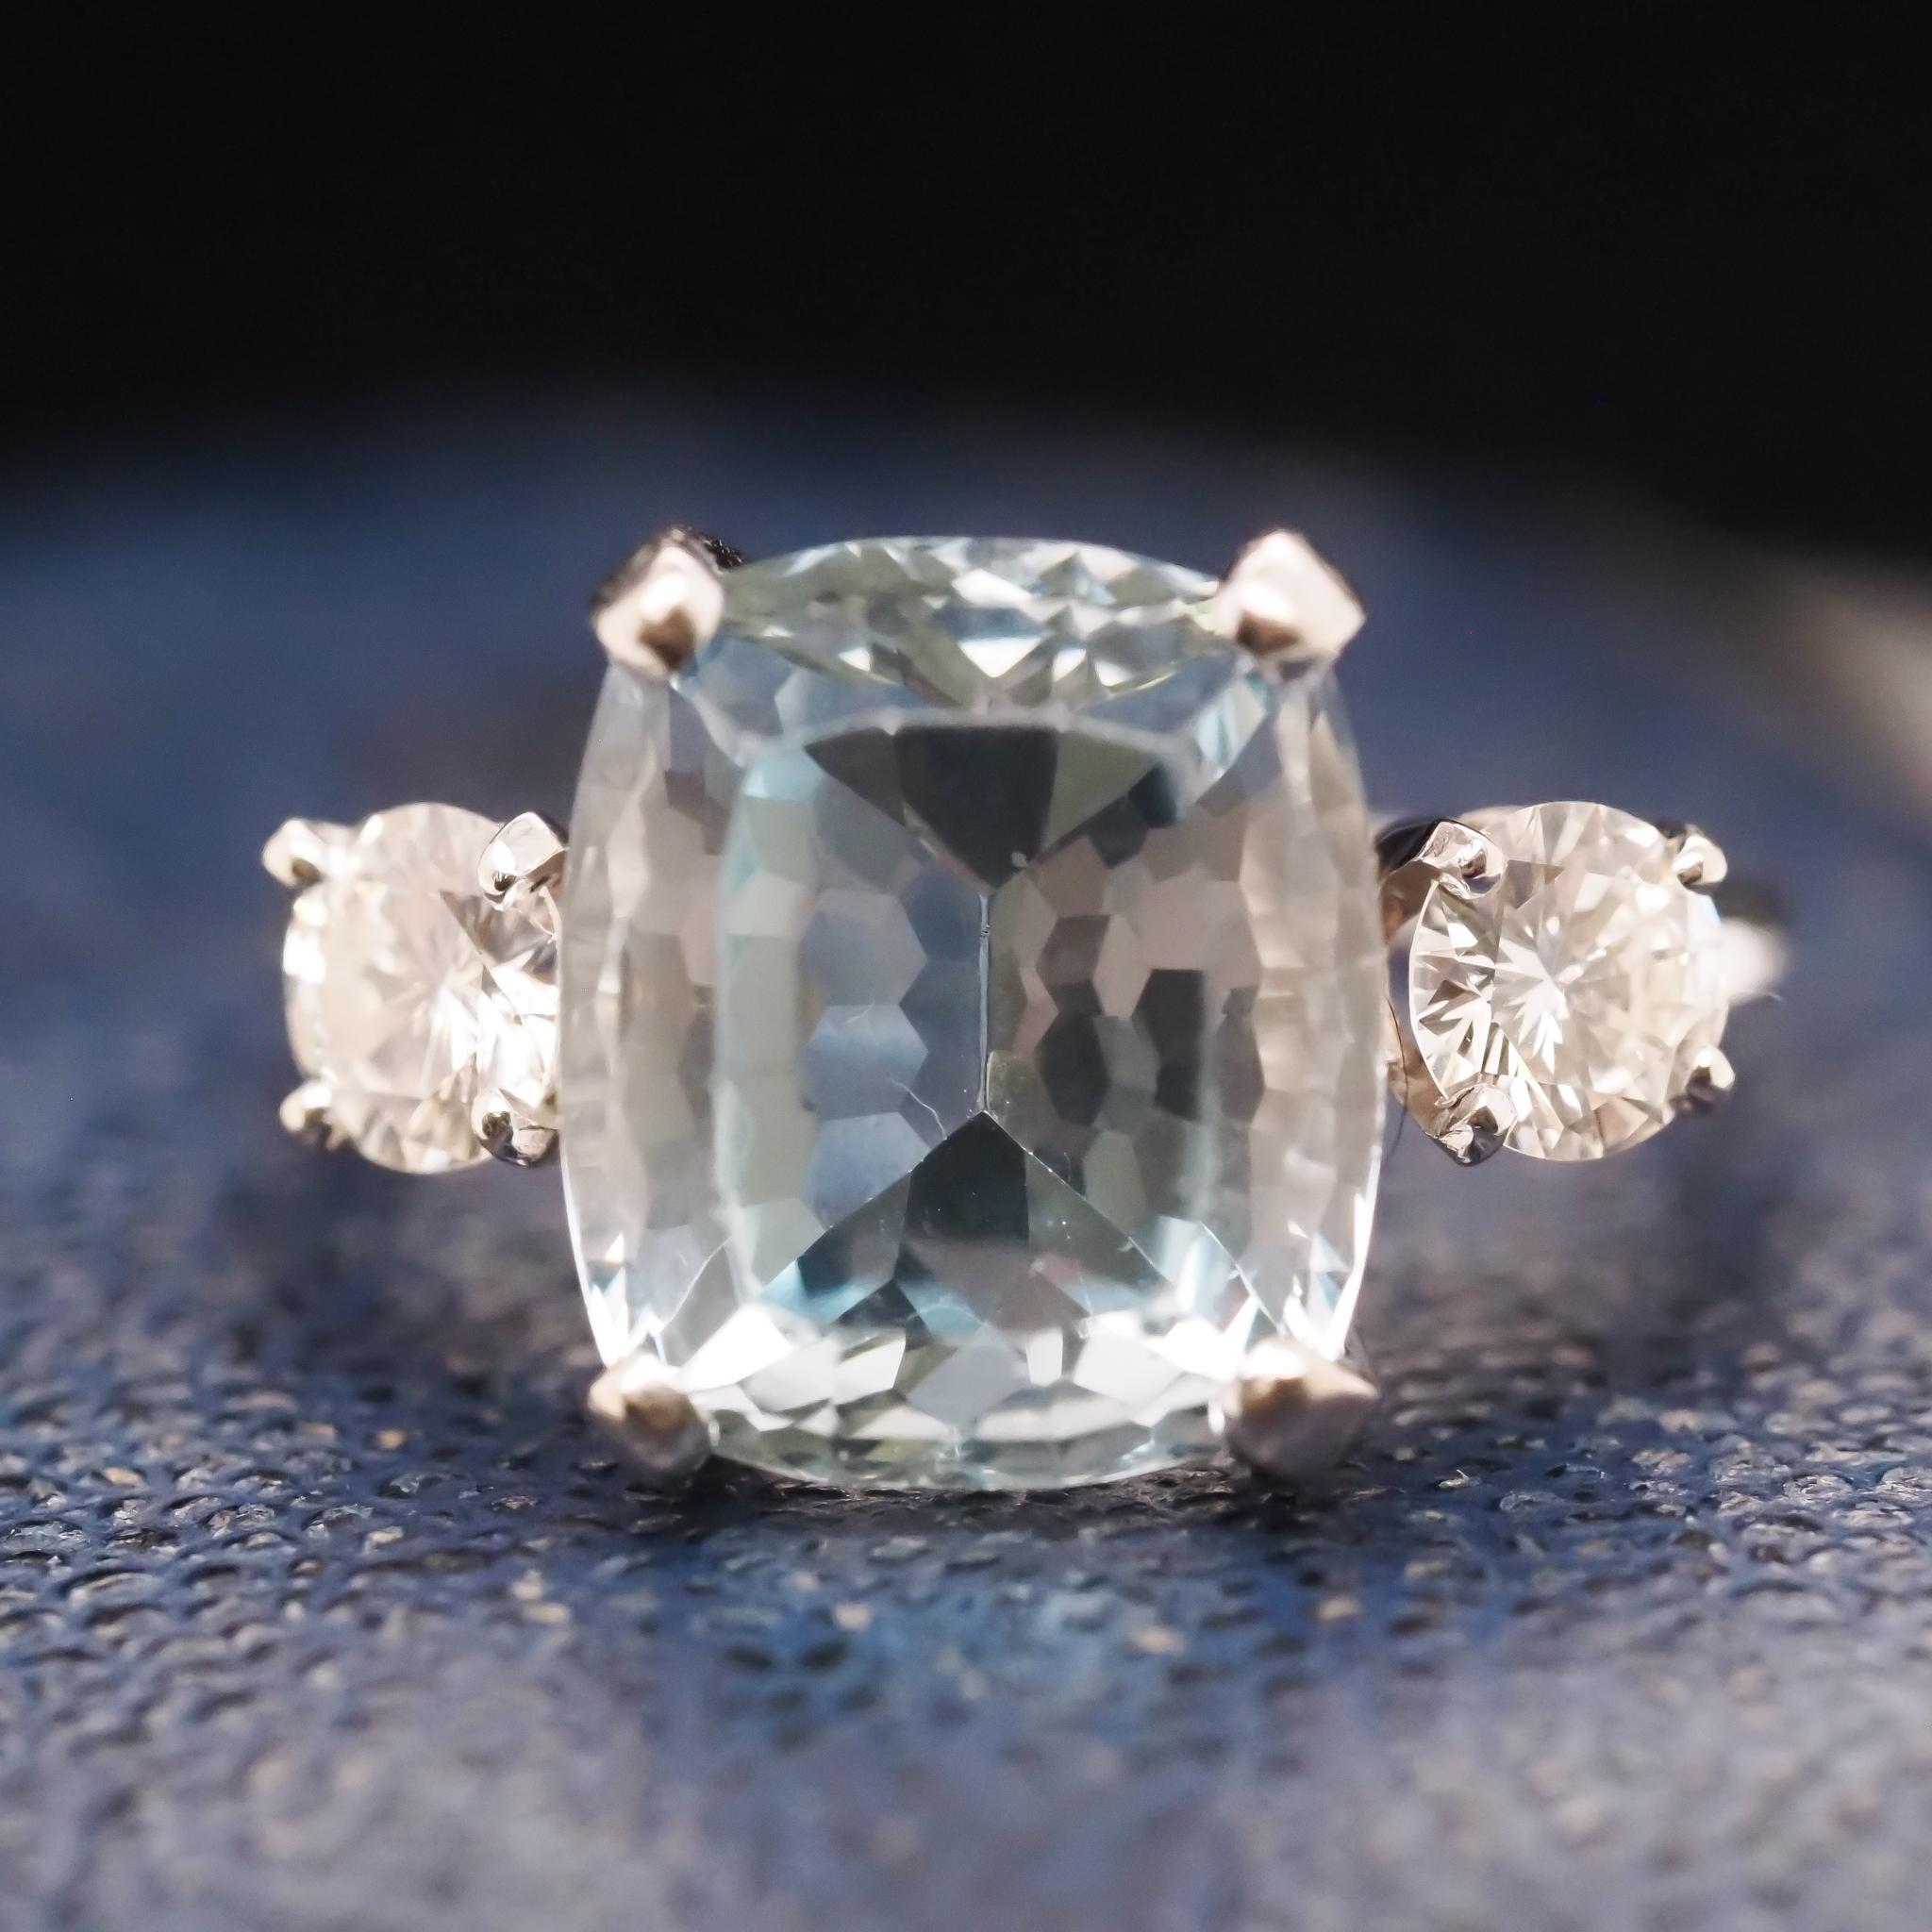 Year: 1940s
Item Details:
Ring Size: 7.25 (Sizable)
Metal Type: 14K White Gold [Hallmarked, and Tested]
Weight: 4.8grams
Aquamarine Details: 5.00ct, Blue, Cushion Cut
Diamond Details: .70ct total weight, Transitional Round, G color, VS Clarity
Band